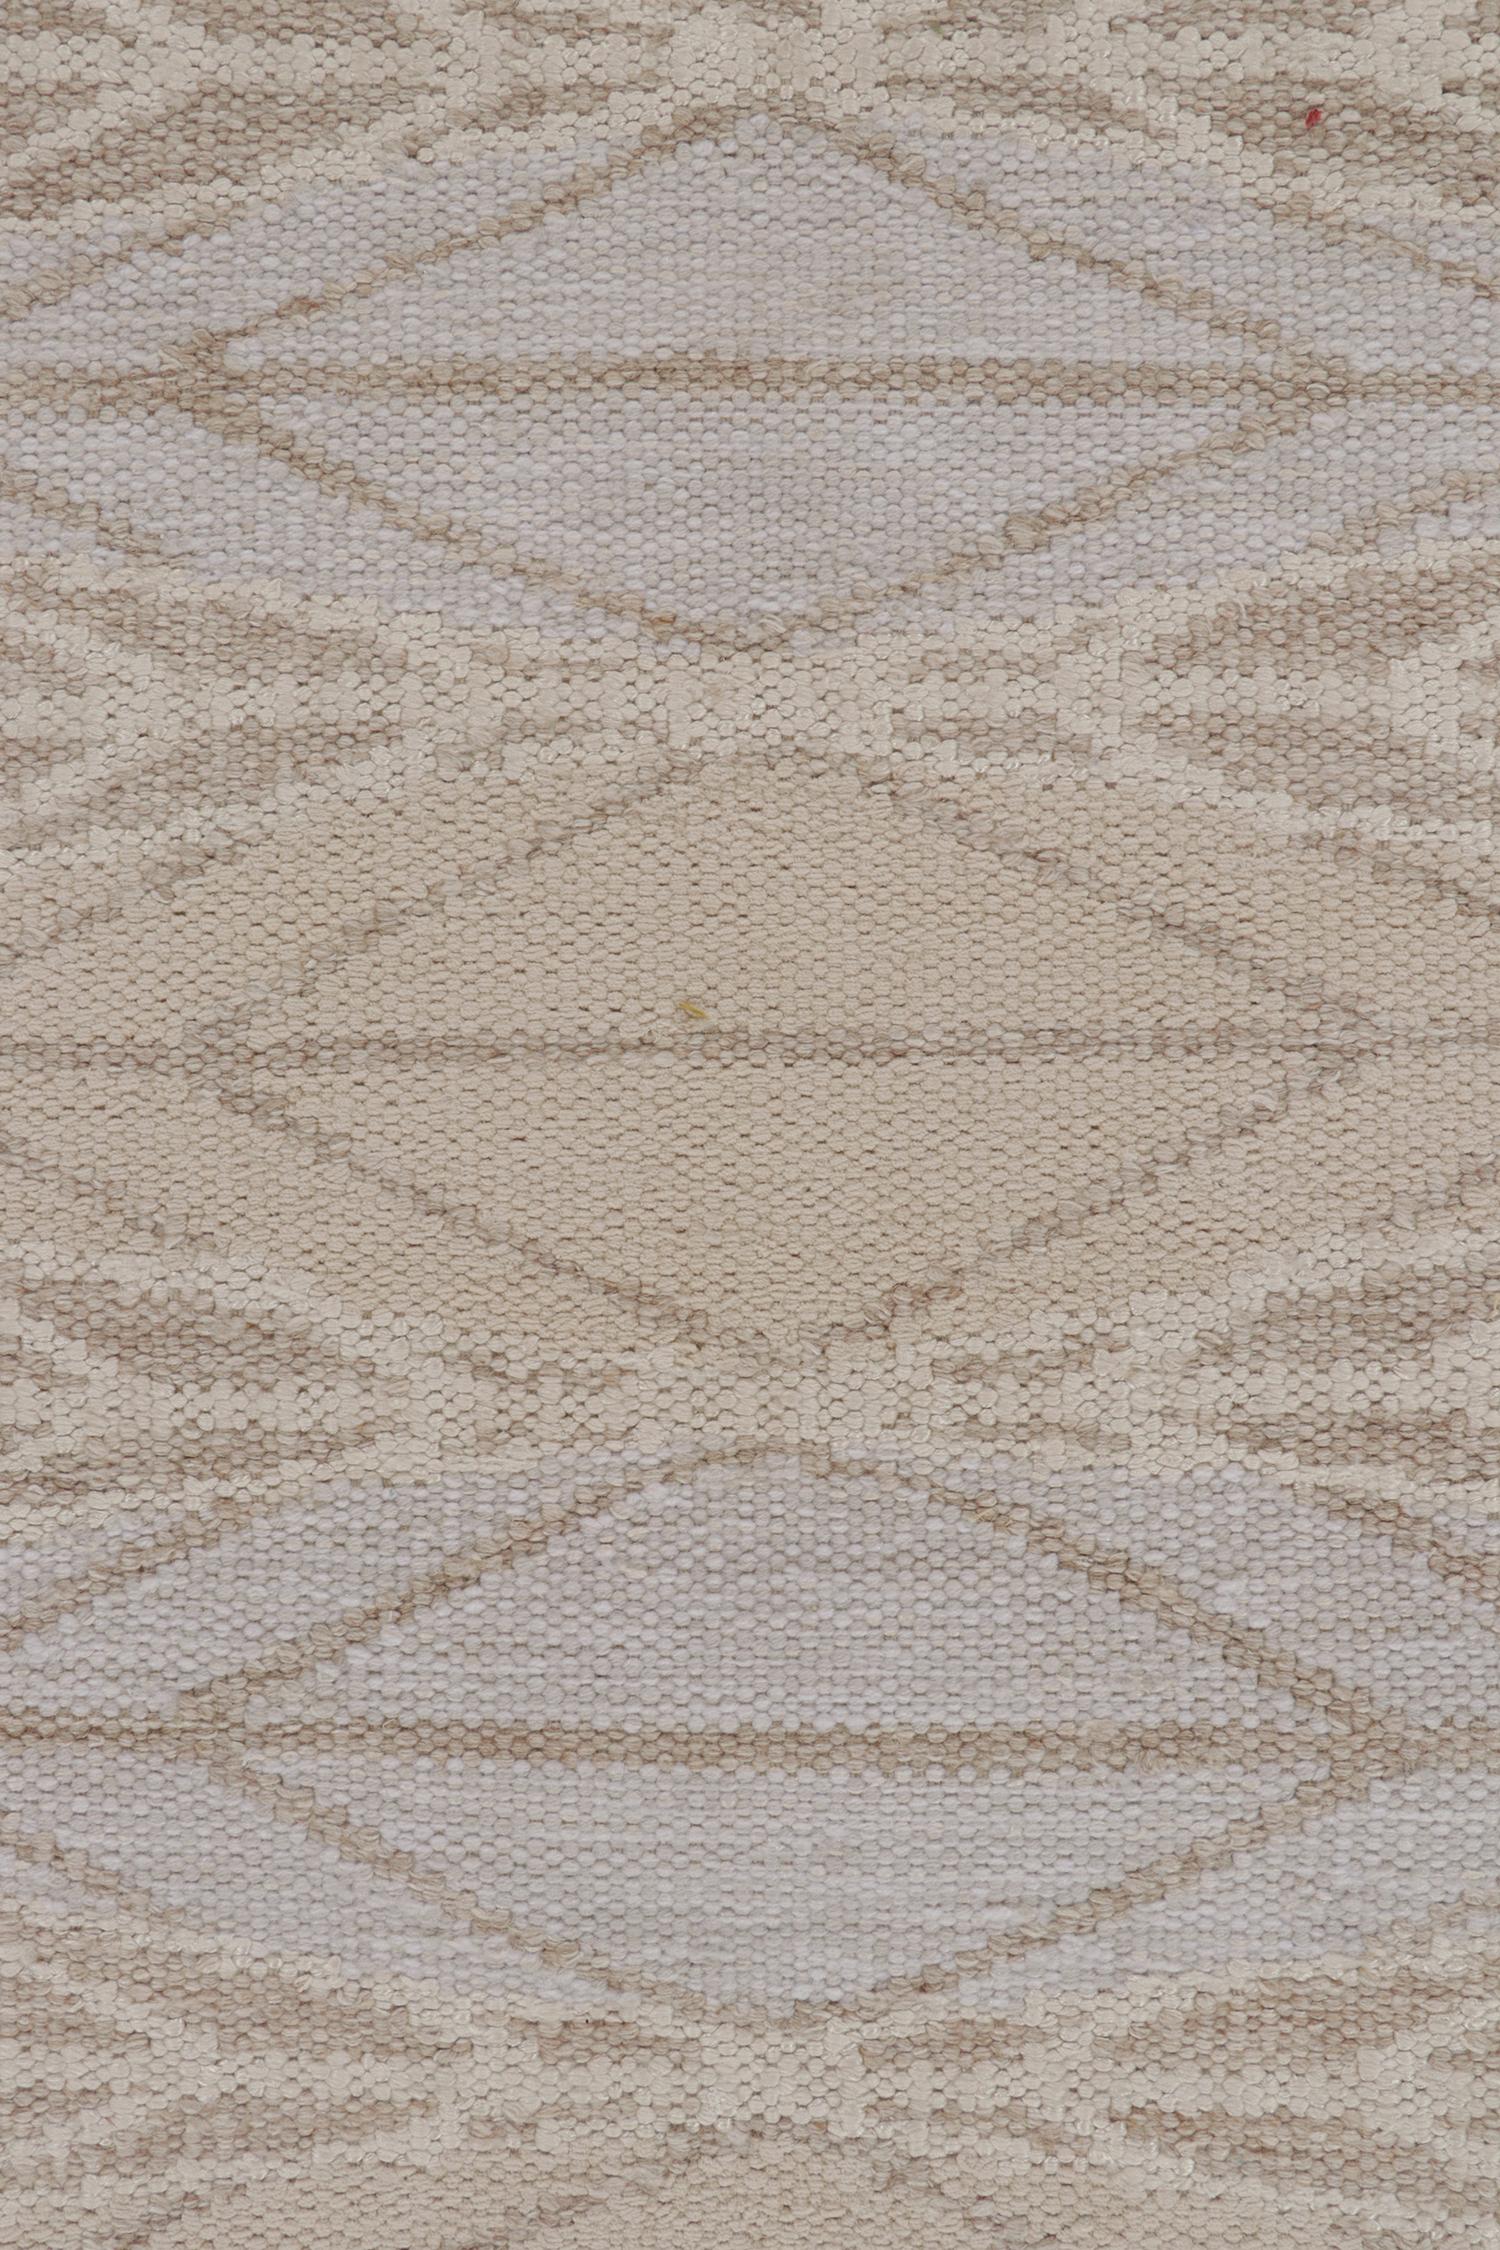 Rug & Kilim’s Scandinavian Style Kilim in Beige, White & Blue Geometric Pattern In New Condition For Sale In Long Island City, NY